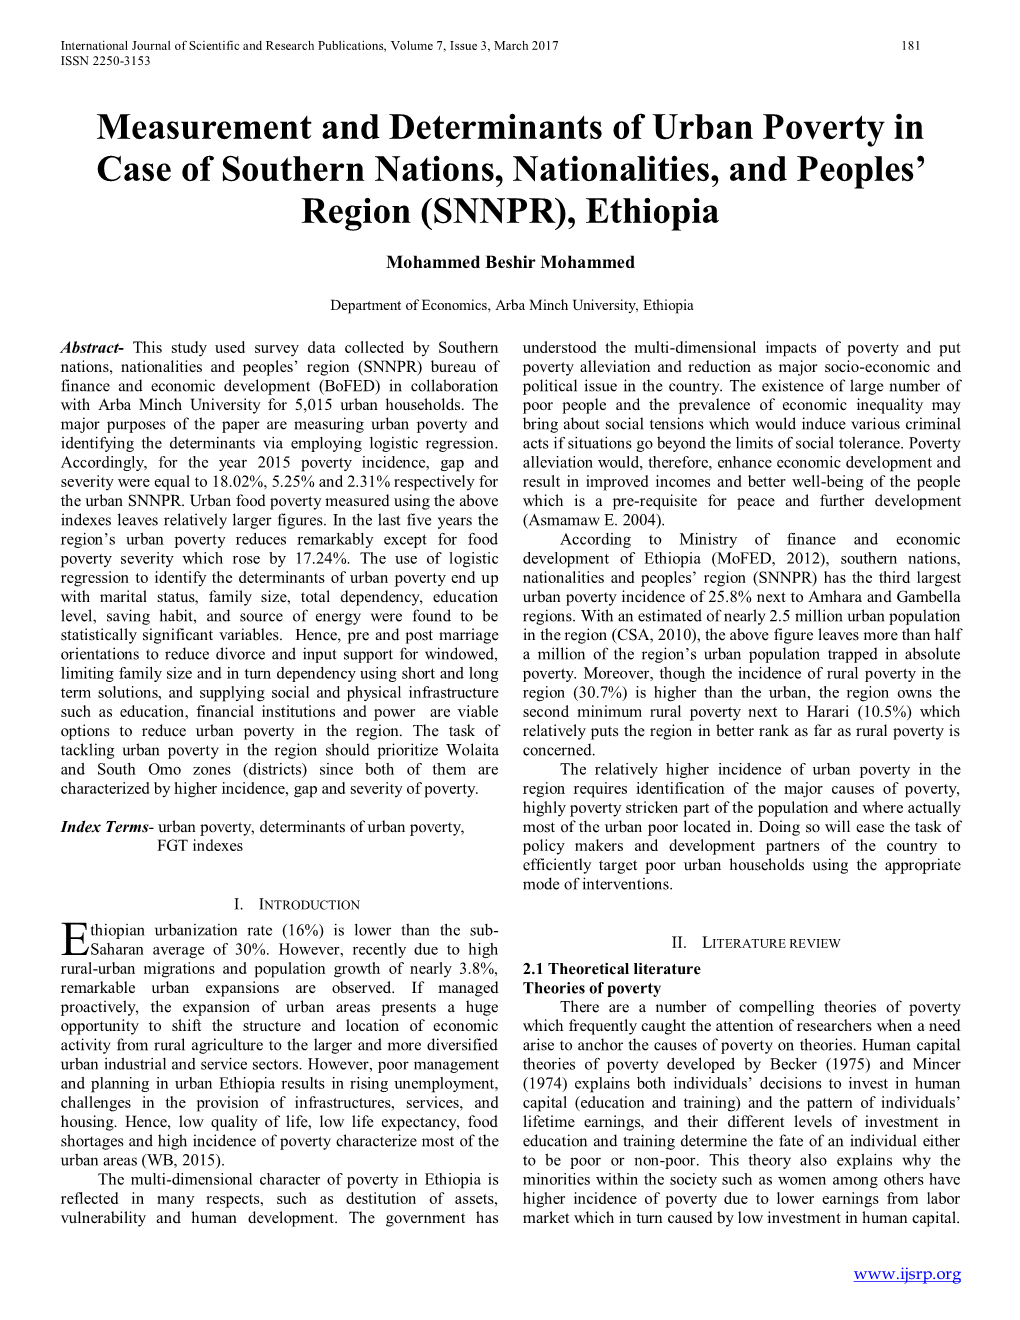 Measurement and Determinants of Urban Poverty in Case of Southern Nations, Nationalities, and Peoples' Region (SNNPR), Ethiopi